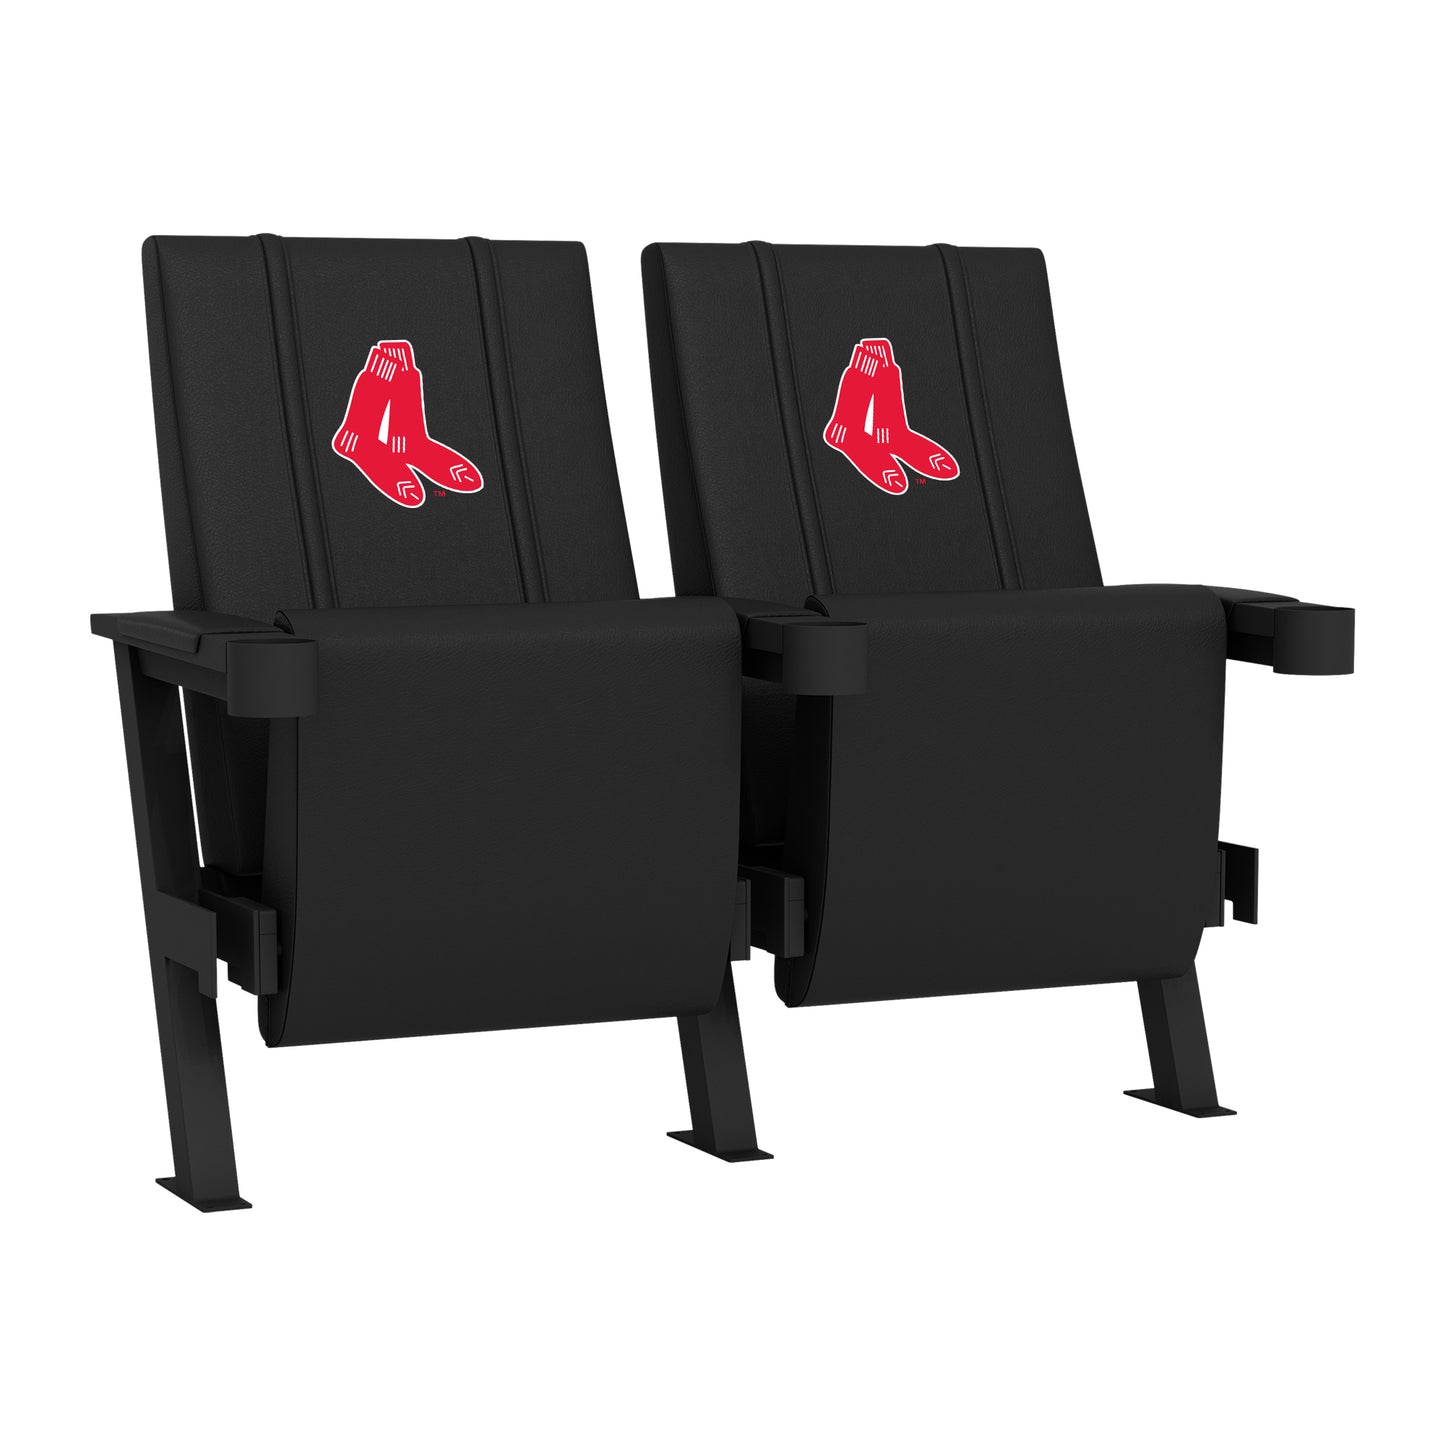 SuiteMax 3.5 VIP Seats with Boston Red Sox Cooperstown Primary Logo